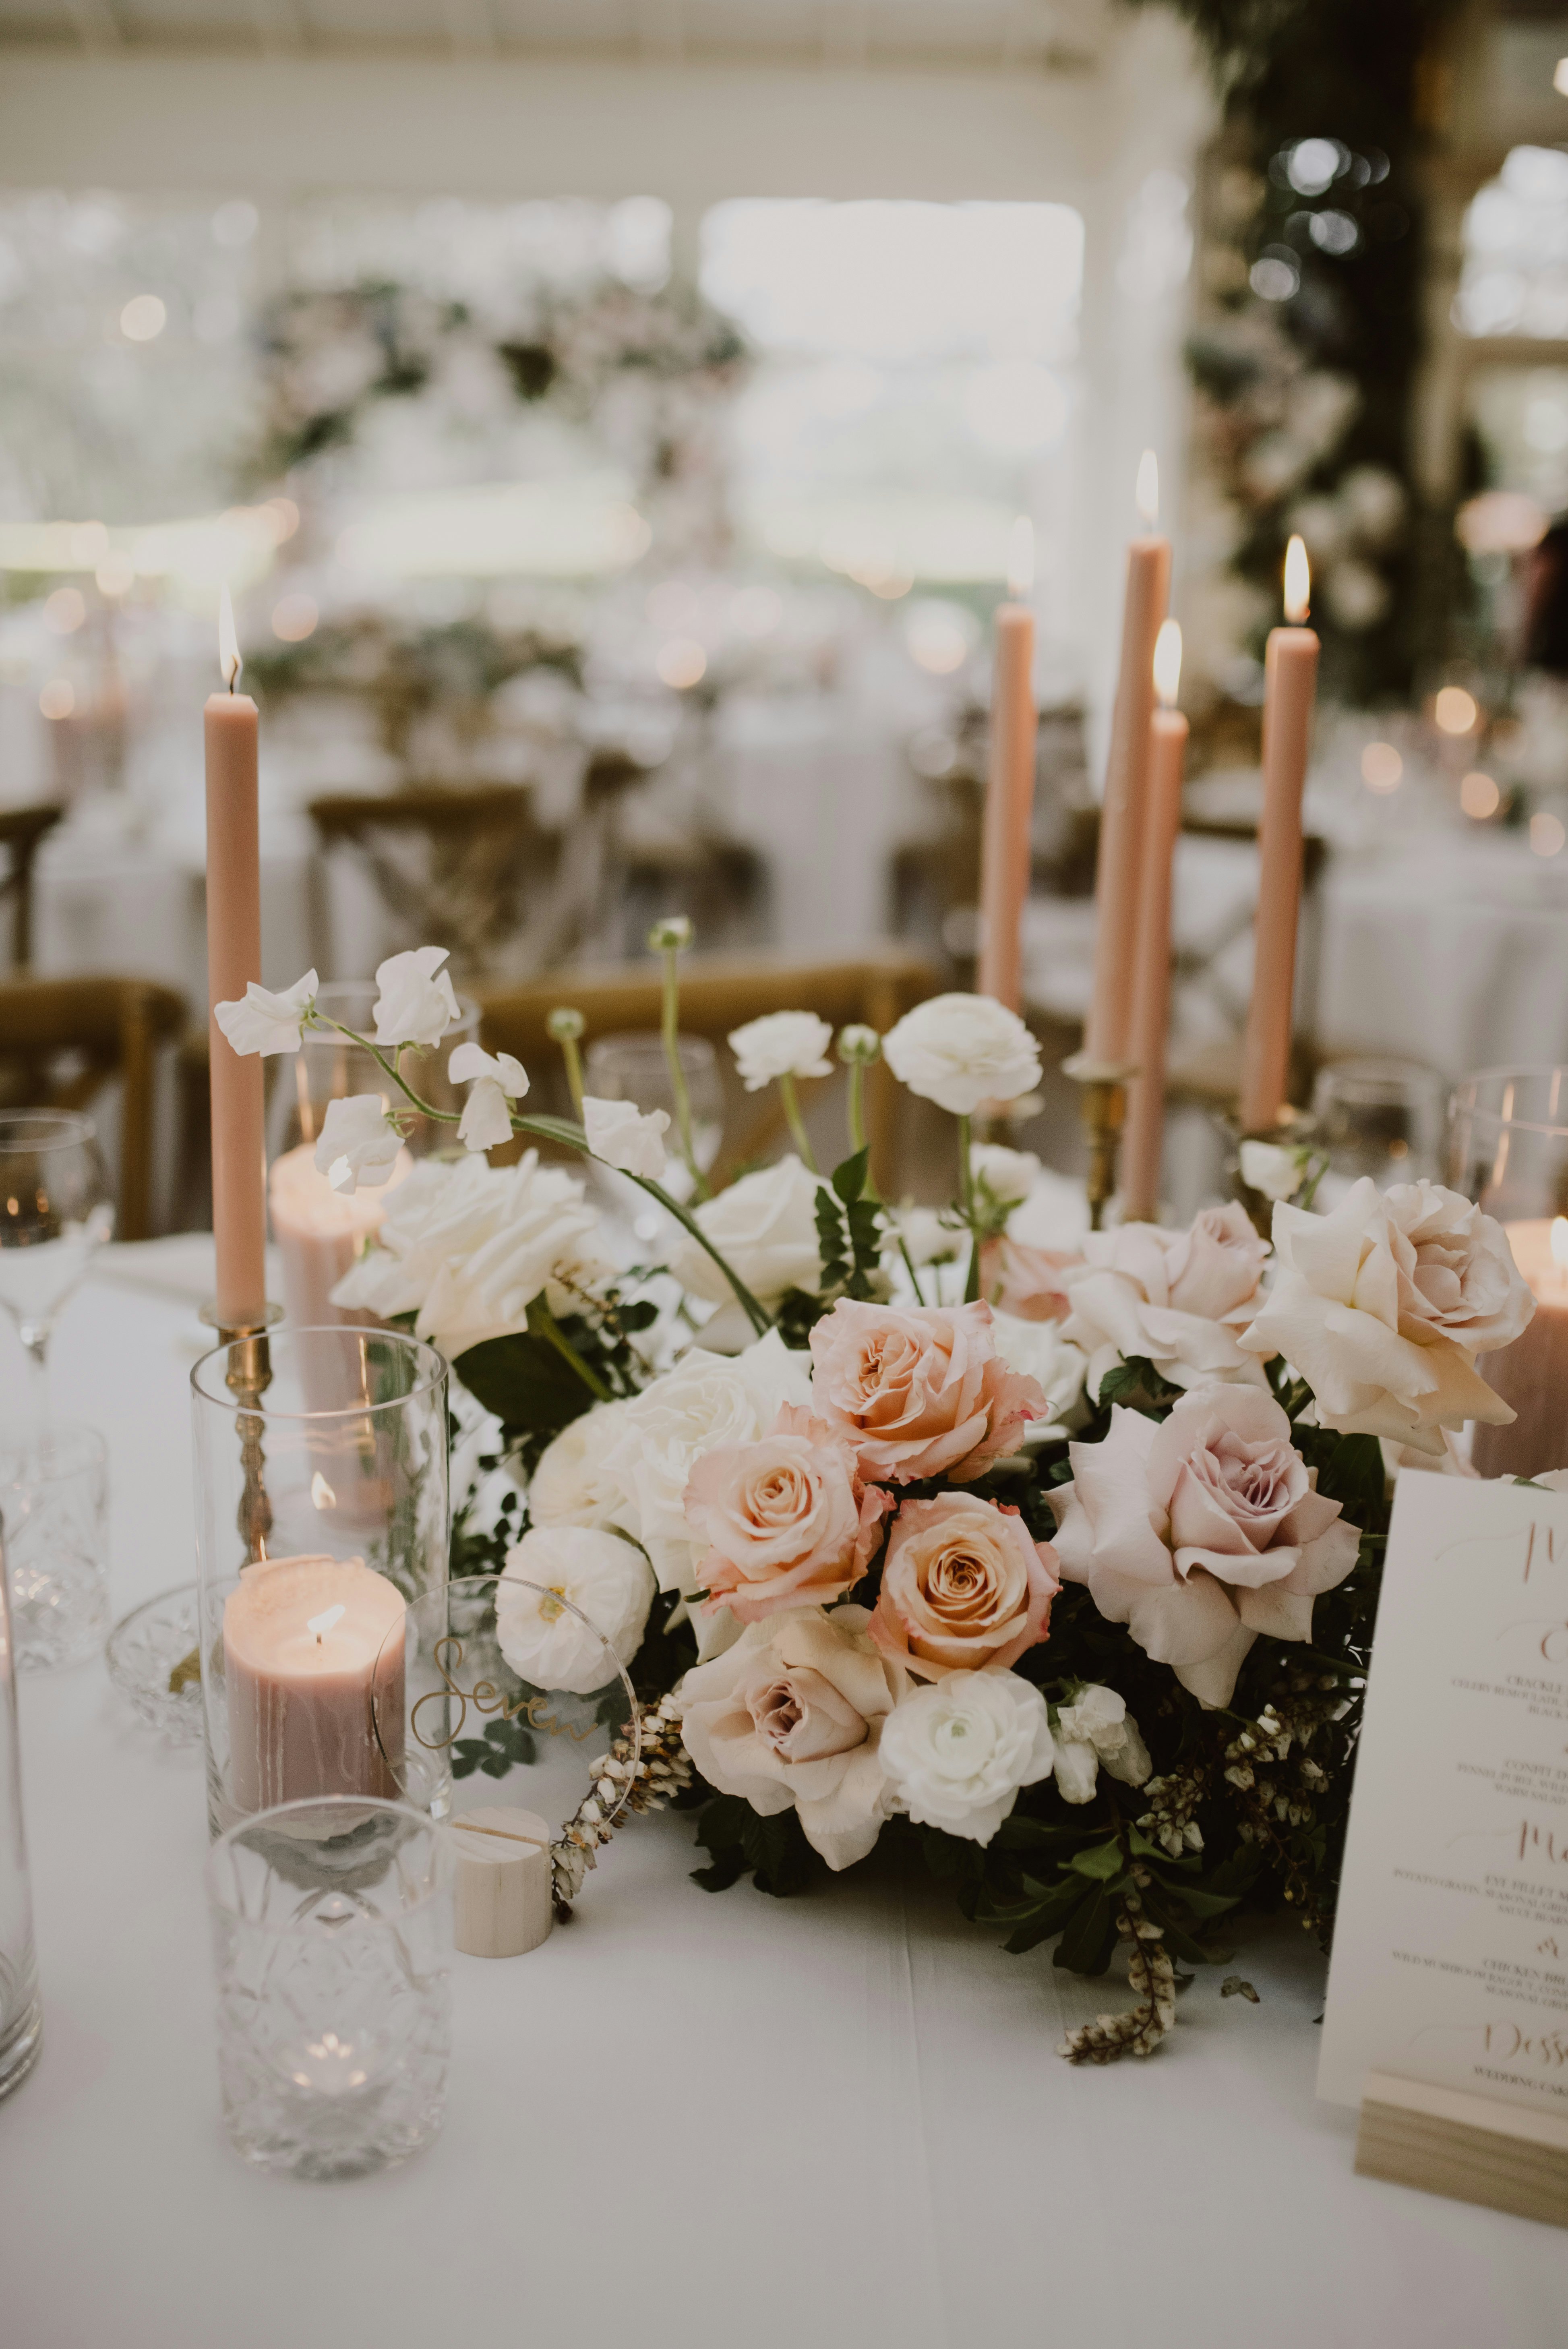 Table setting at wedding with pink roses and candles 